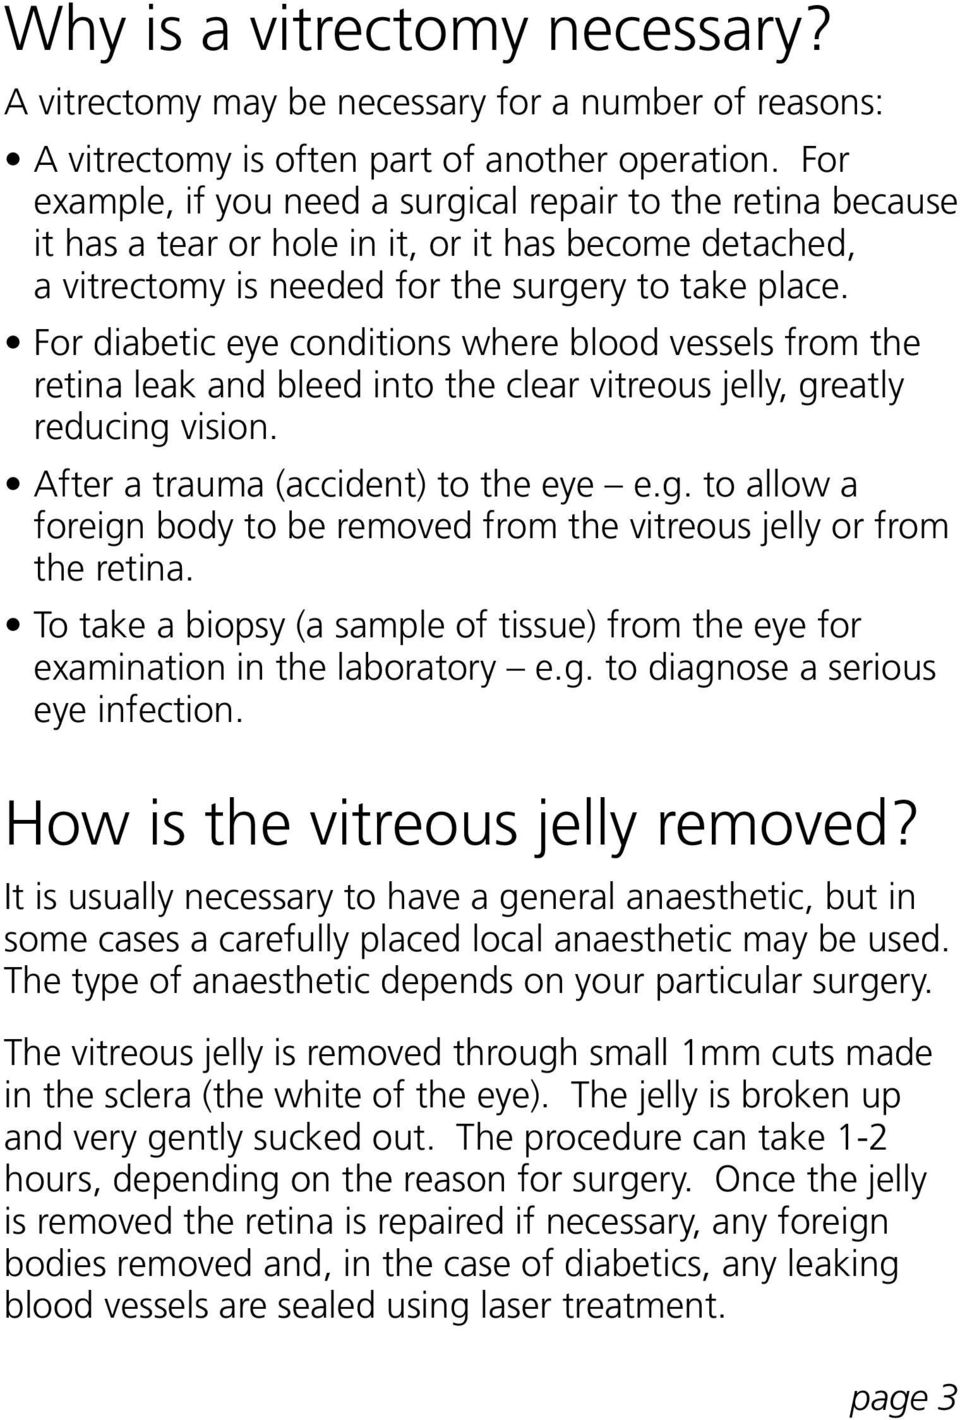 For diabetic eye conditions where blood vessels from the retina leak and bleed into the clear vitreous jelly, greatly reducing vision. After a trauma (accident) to the eye e.g. to allow a foreign body to be removed from the vitreous jelly or from the retina.